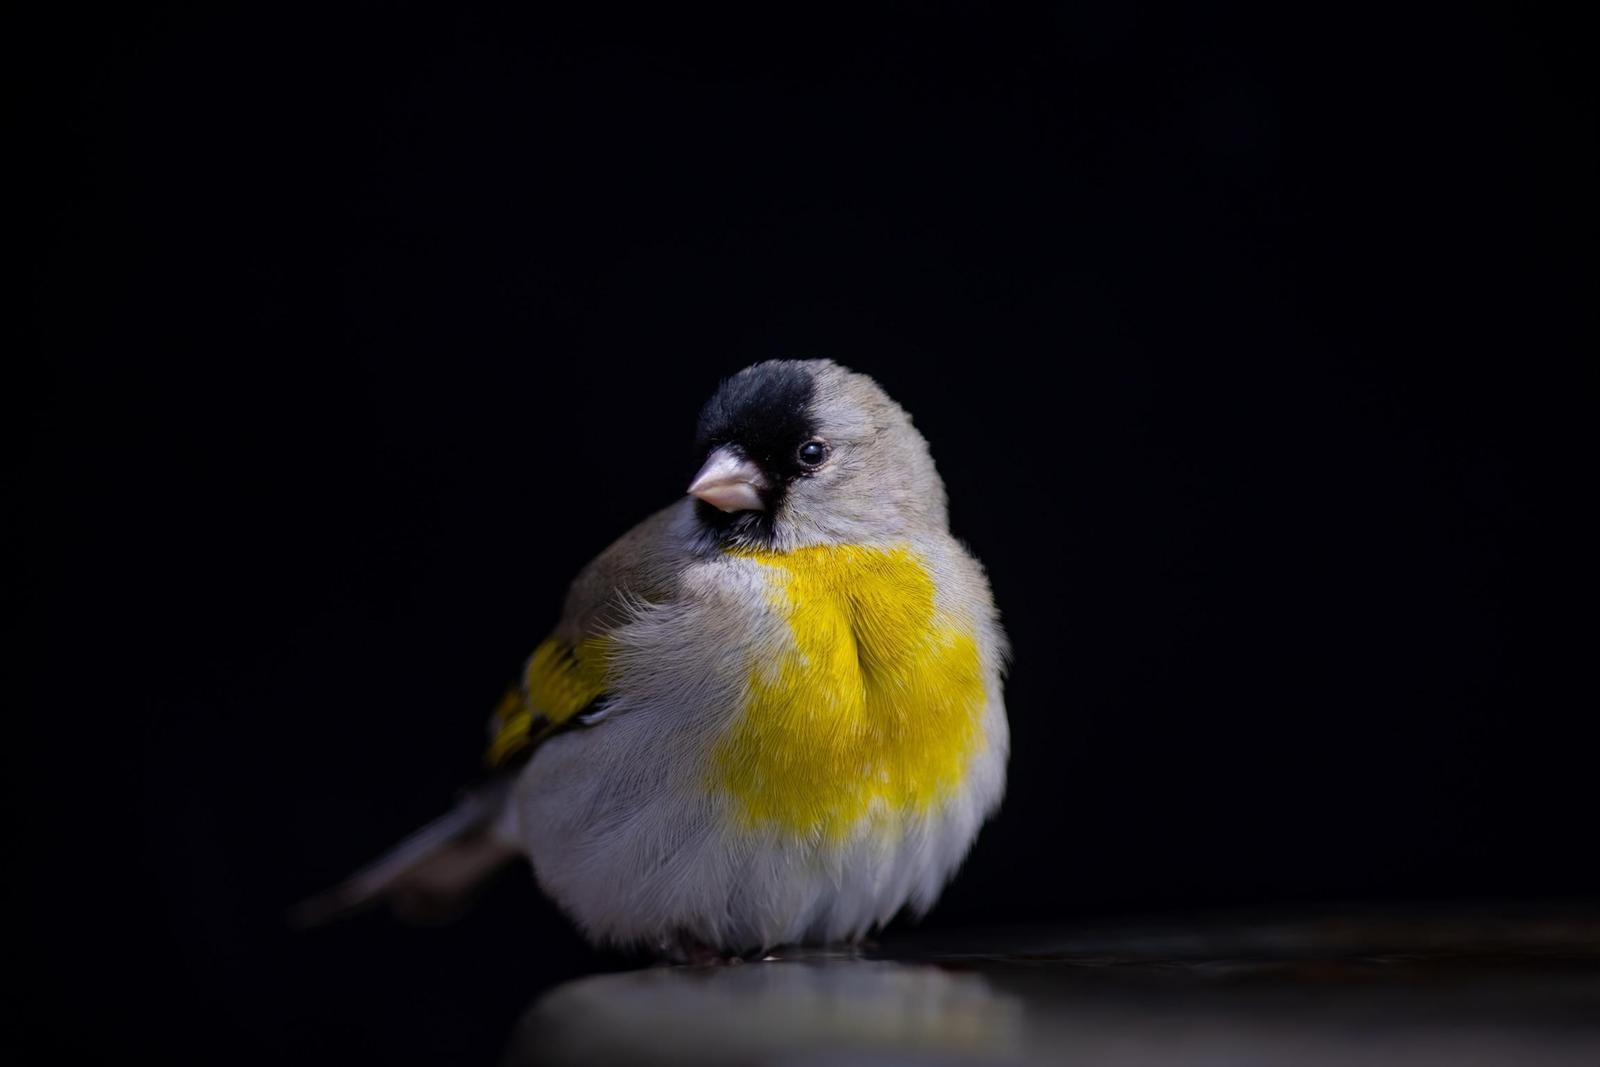 Lawrence's Goldfinch Photo by Tom Ford-Hutchinson